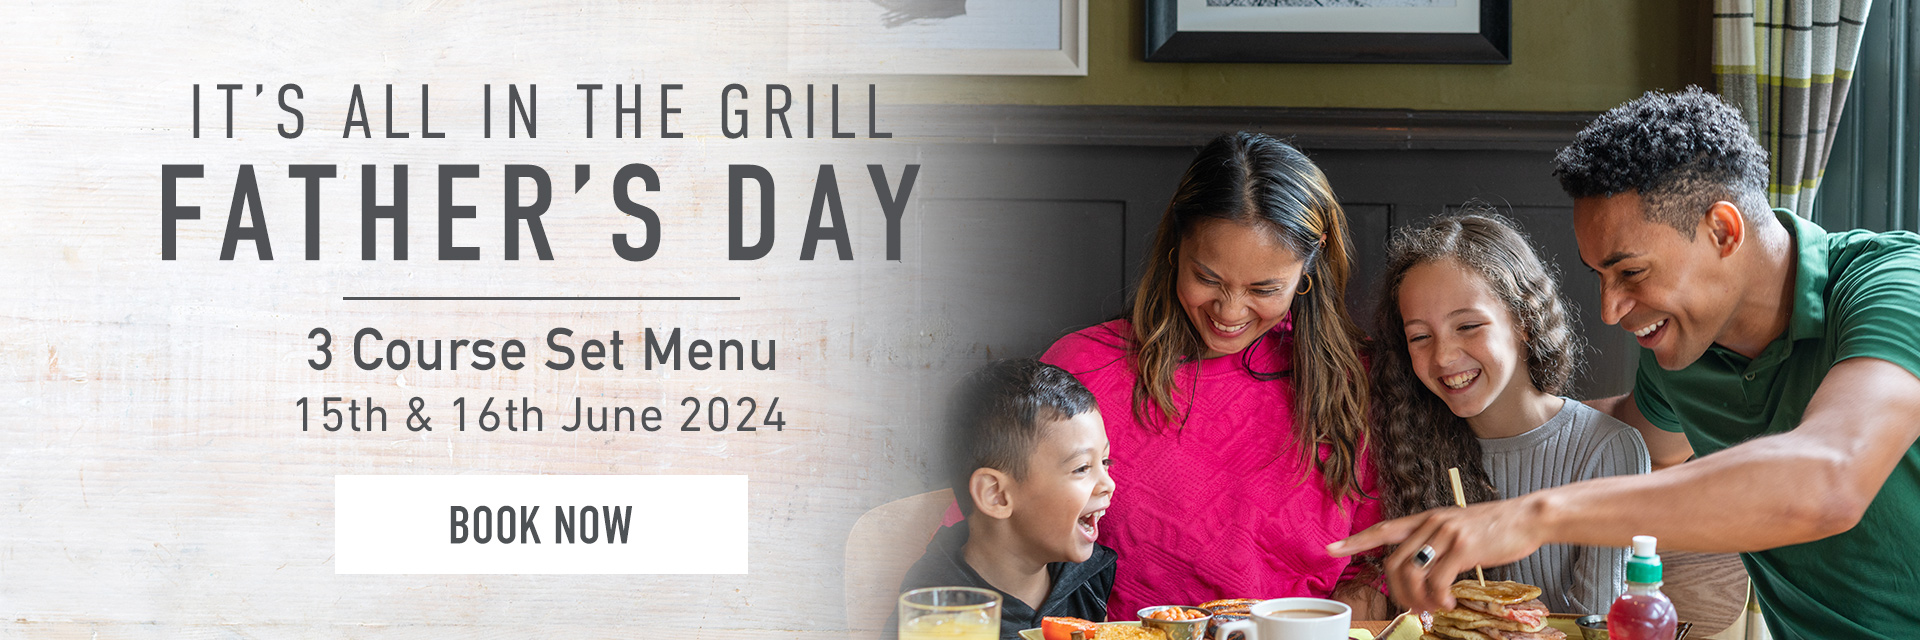 Father’s Day at Harvester Whiteley